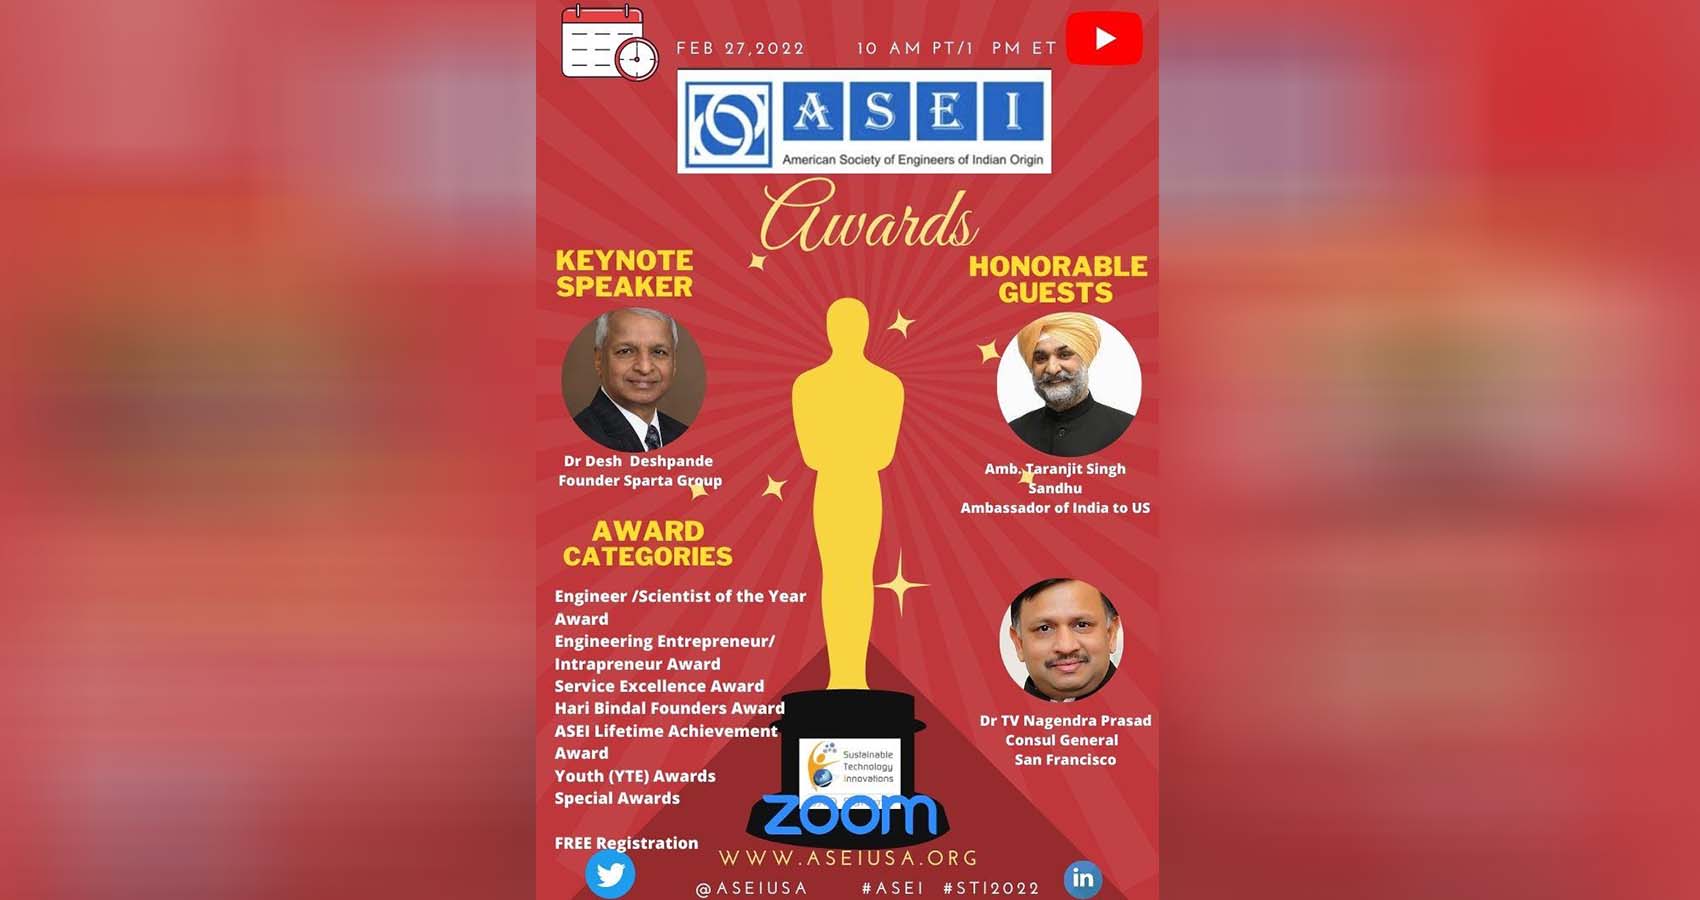 ASEI To Honor Engineers, Scientists And Community Leaders At Its 34th National Convention Finale Awards Event